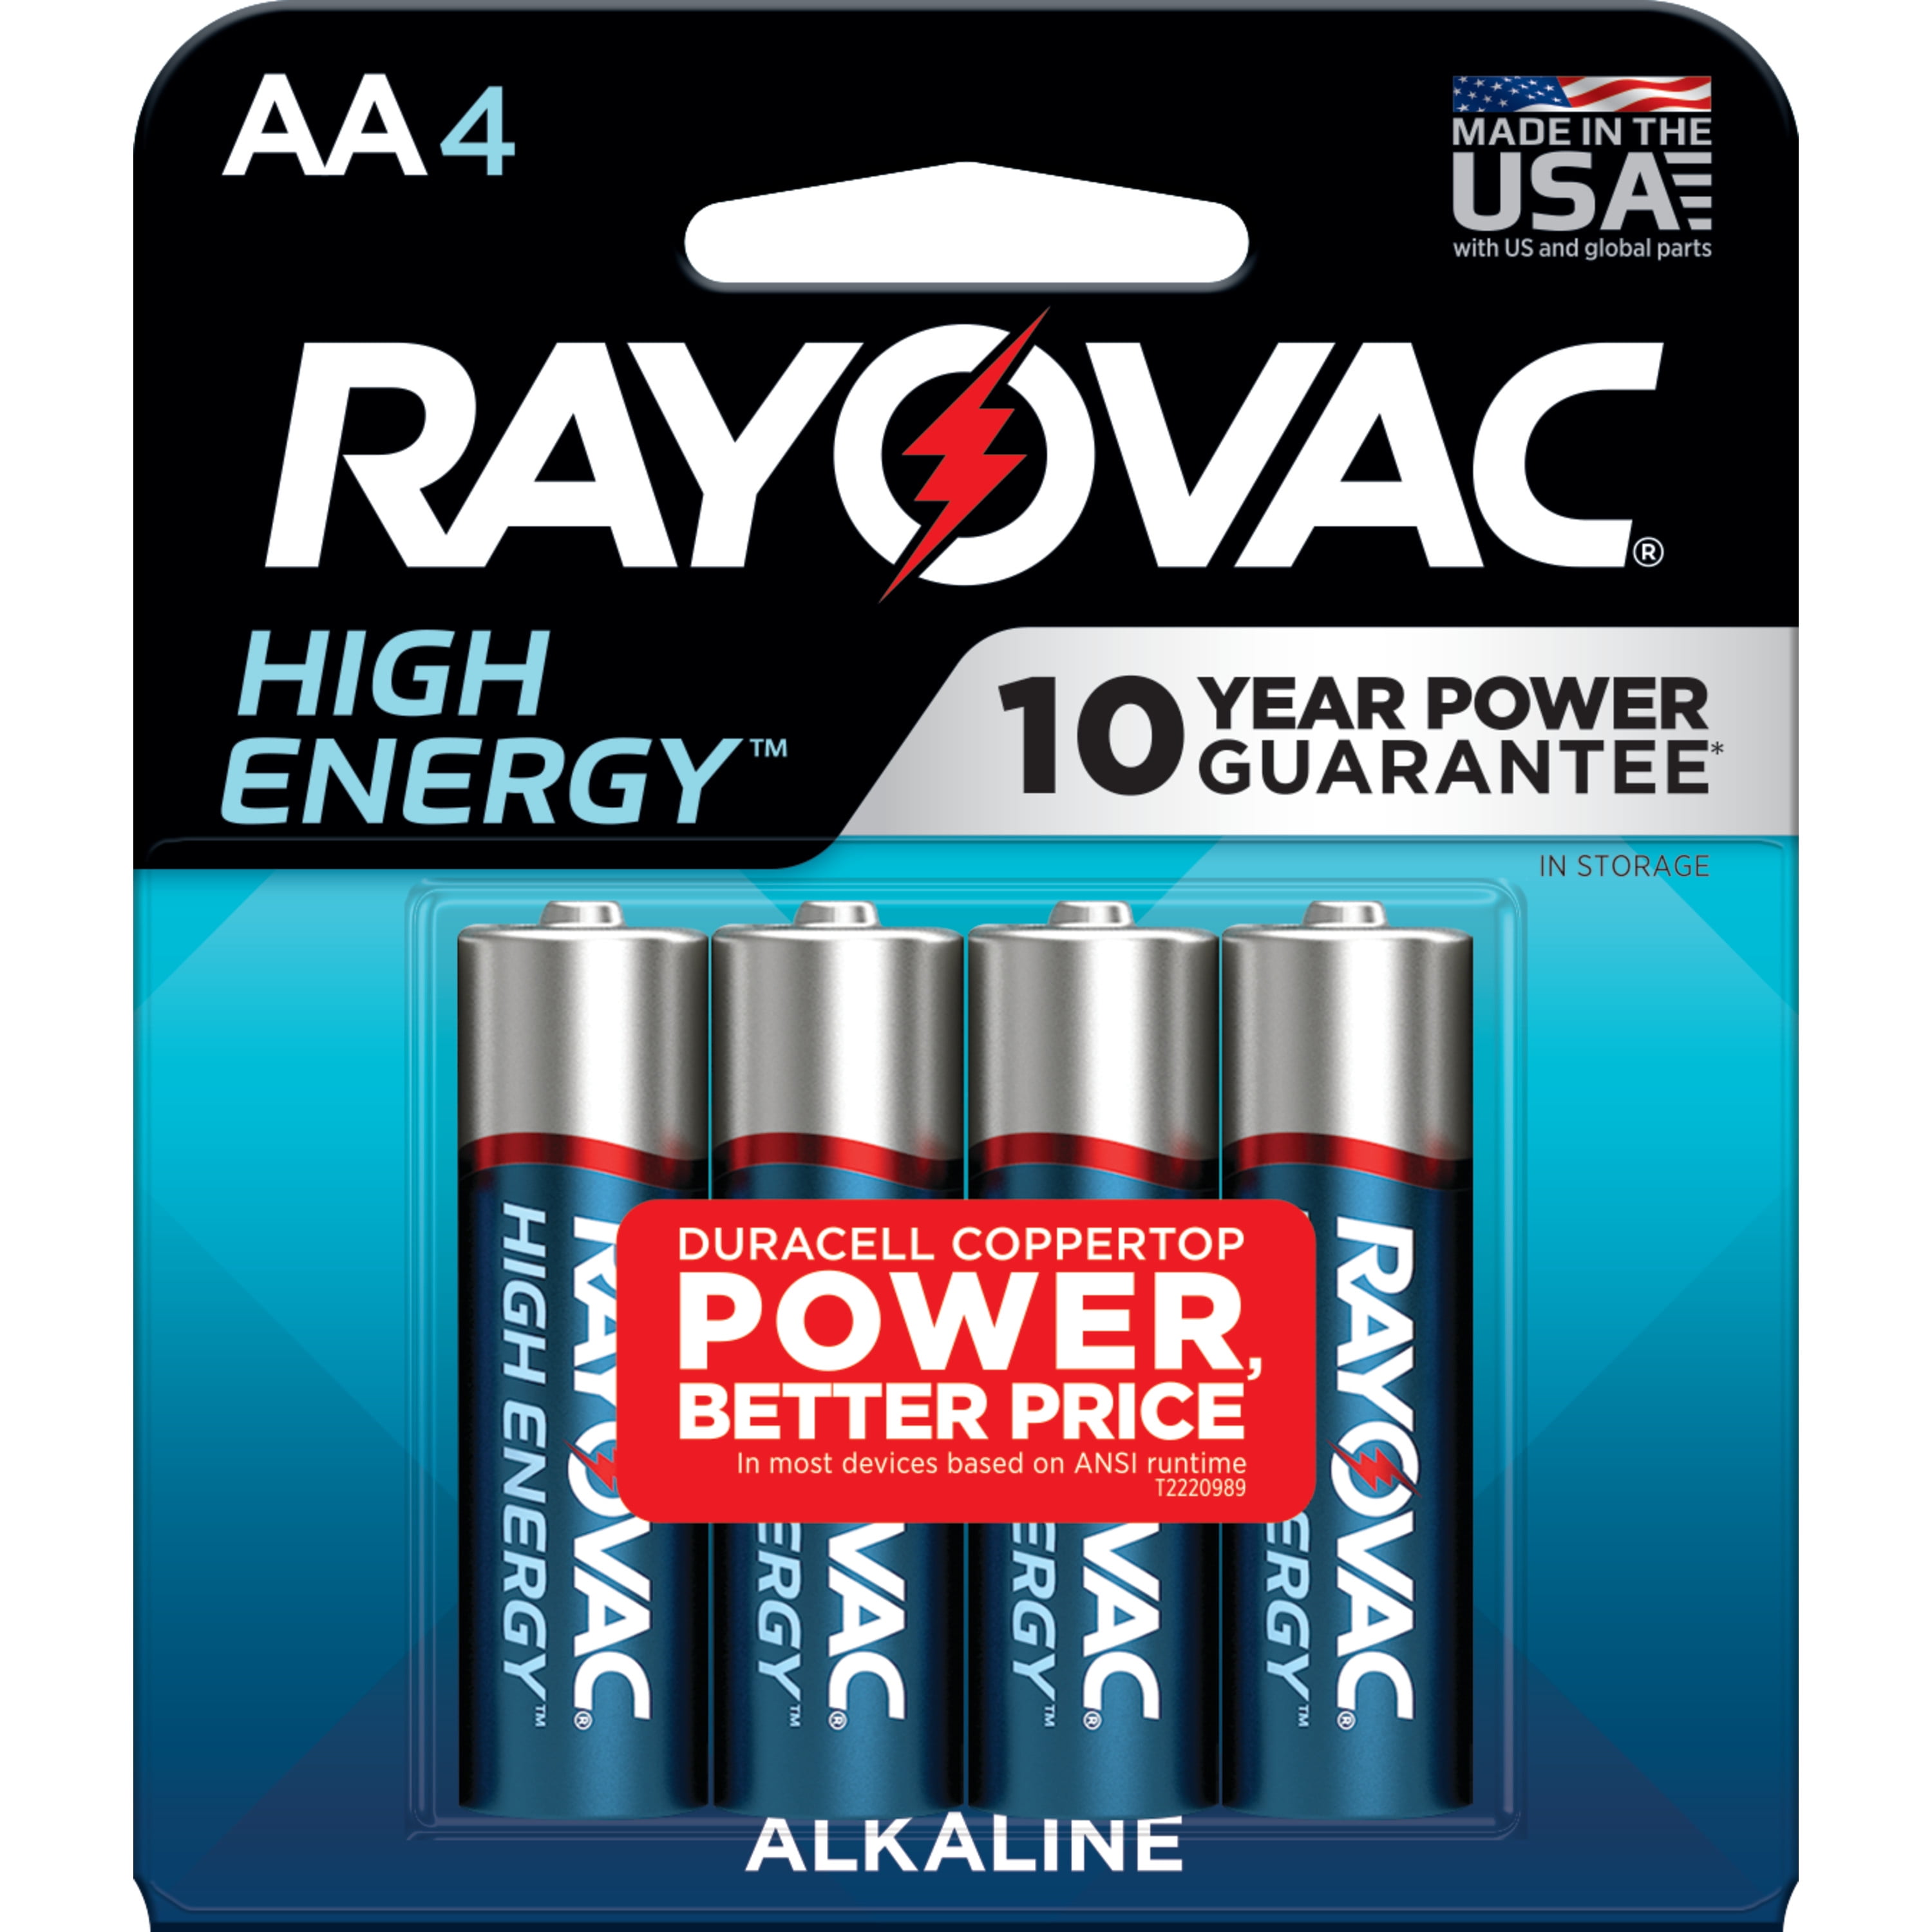 Rayovac High Energy AA Batteries (4 Pack), Double A Batteries